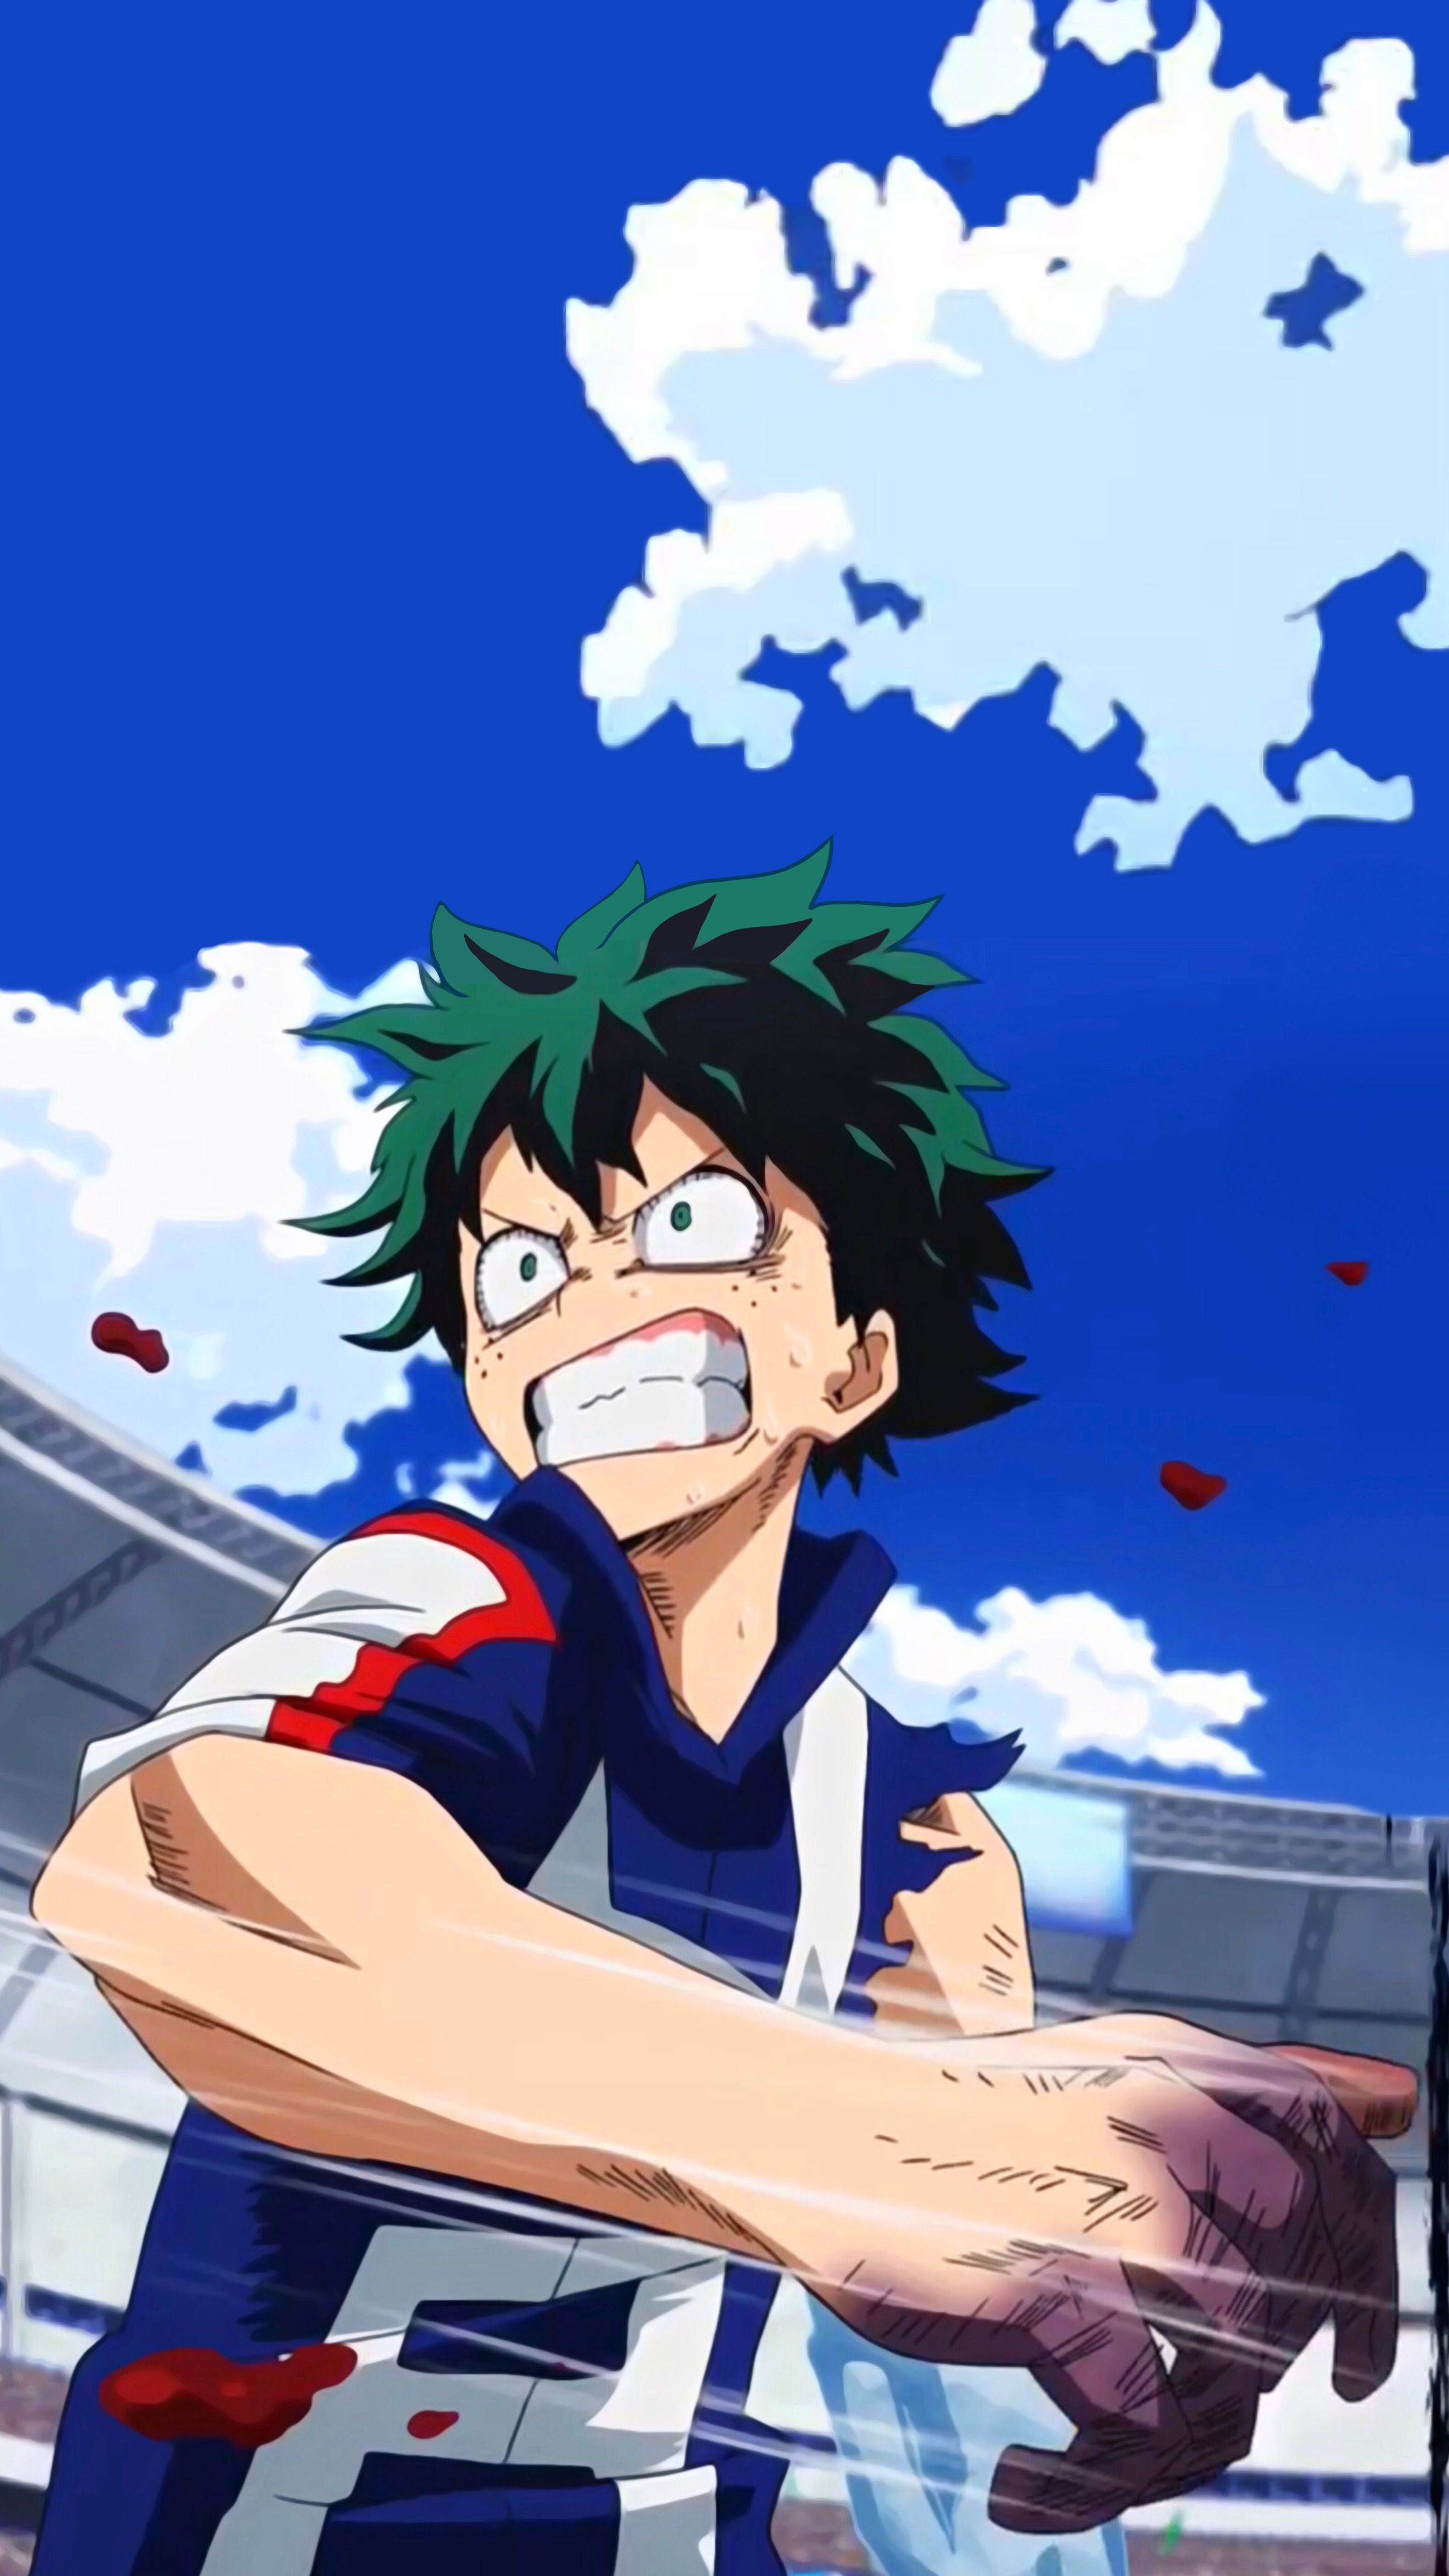 My Hero Academia wallpaper with the character Izuku Midoriya, also known as All Might, holding a red quirk symbol on his fist. The background is a blue sky with white clouds. - Deku